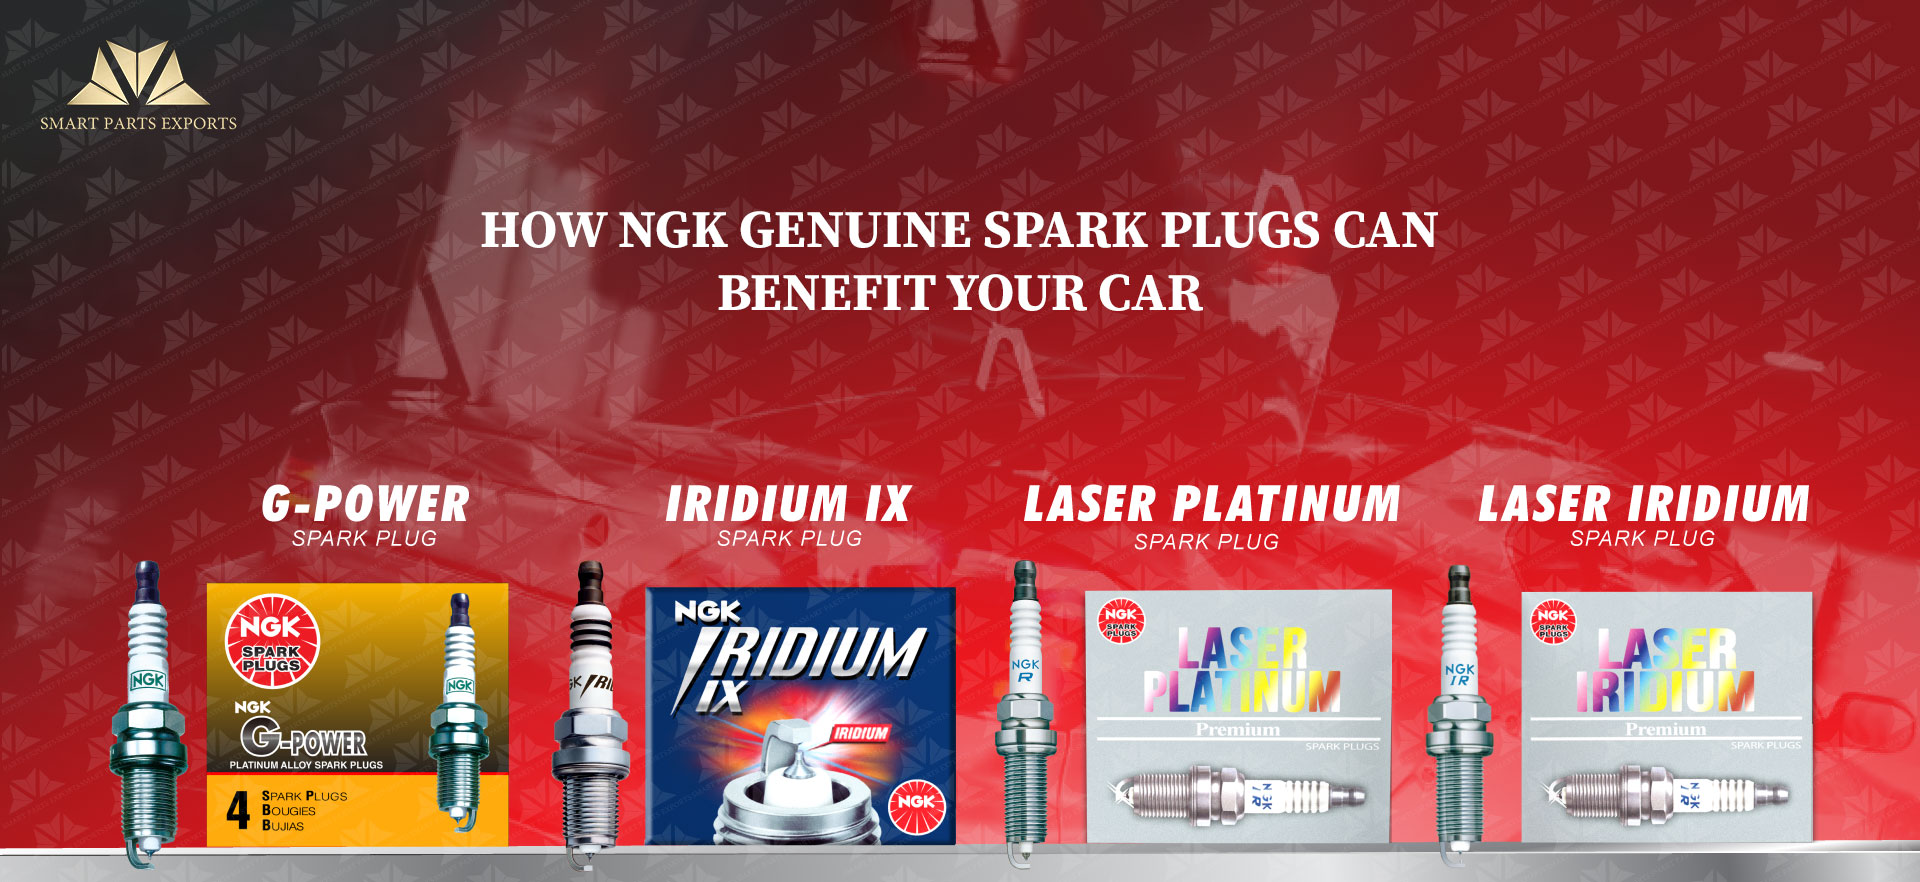 How NGK Genuine Spark Plugs Can Benefit Your Car